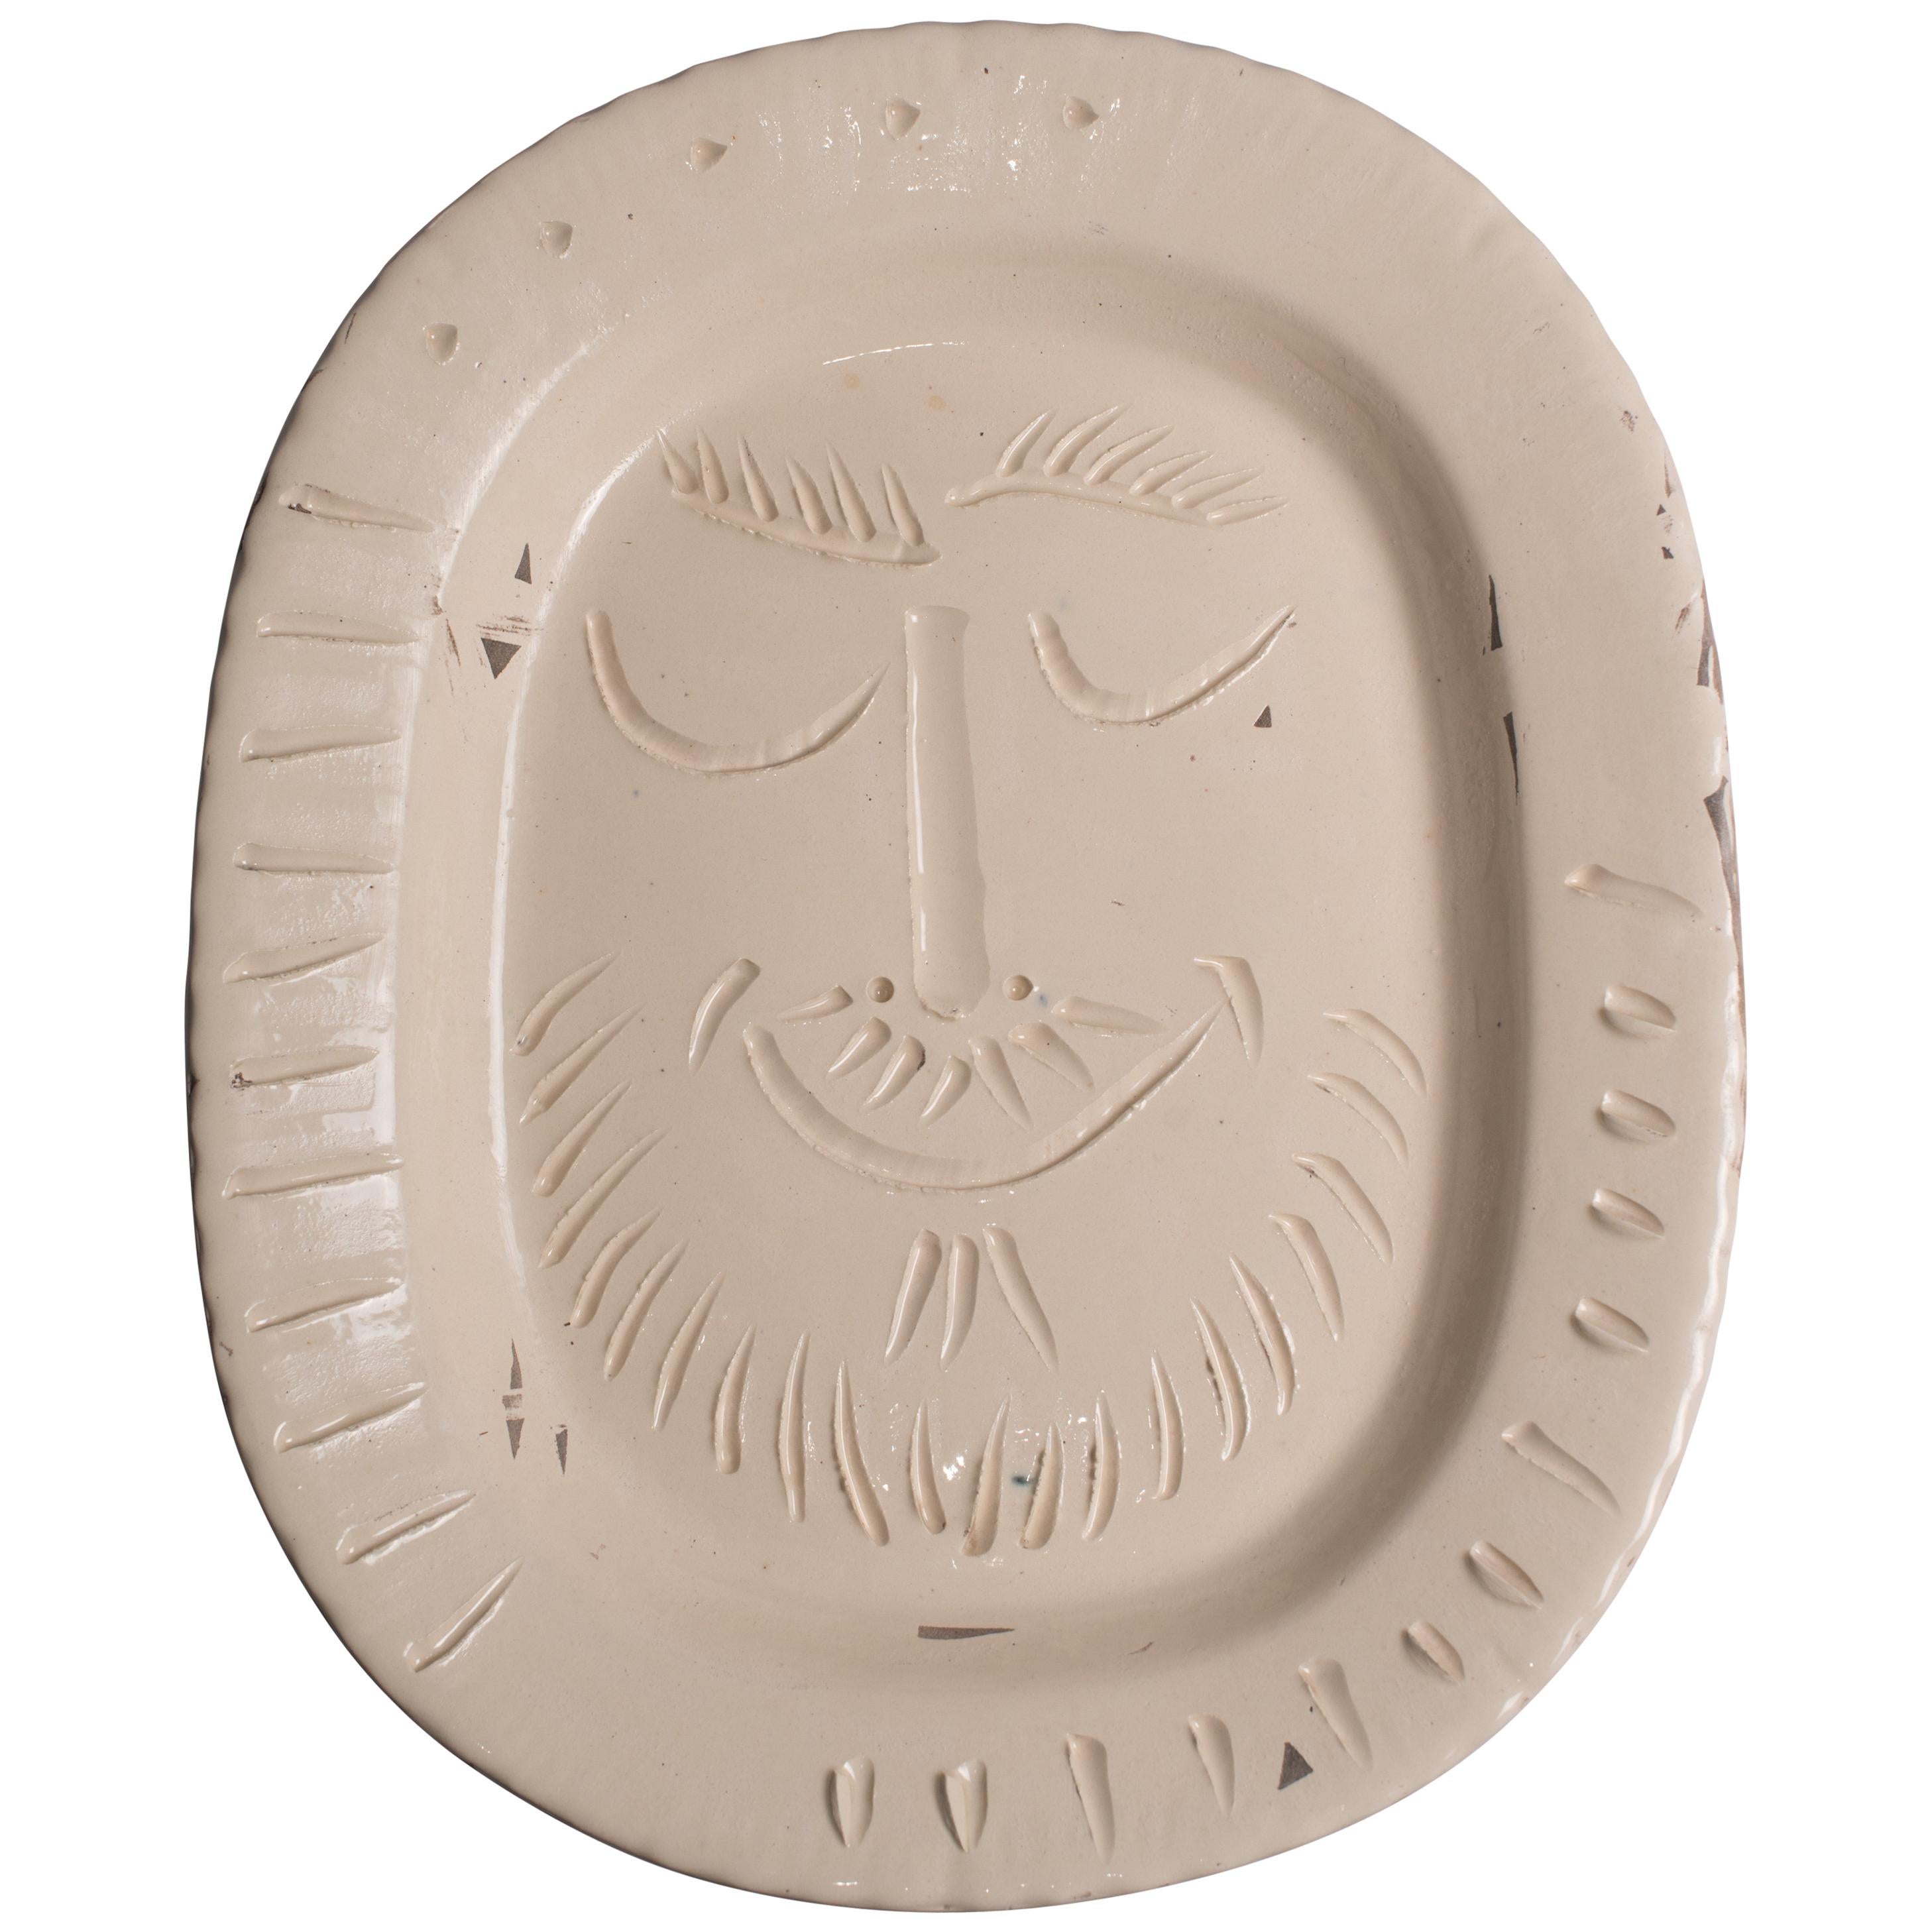 Pablo Picasso 'Man's Face', Dish of White Earthenware by Madoura Factory, 1955